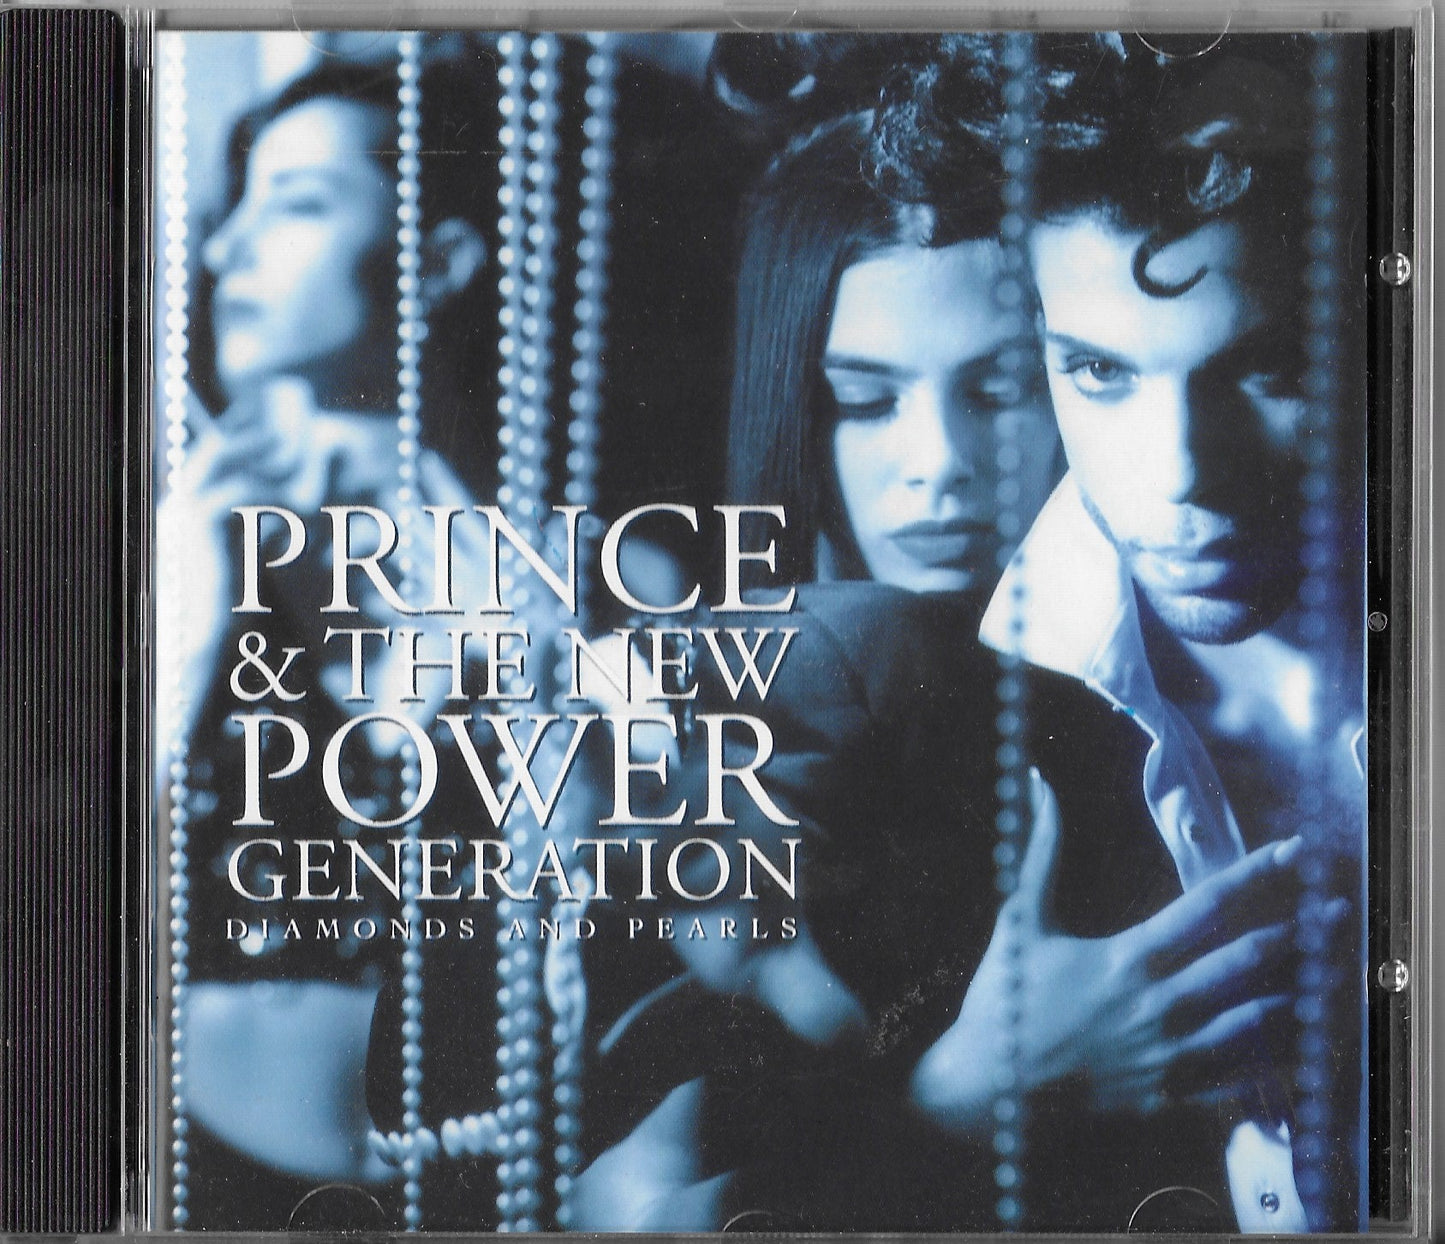 PRINCE & THE NEW POWER GENERATION - Diamonds And Pearls